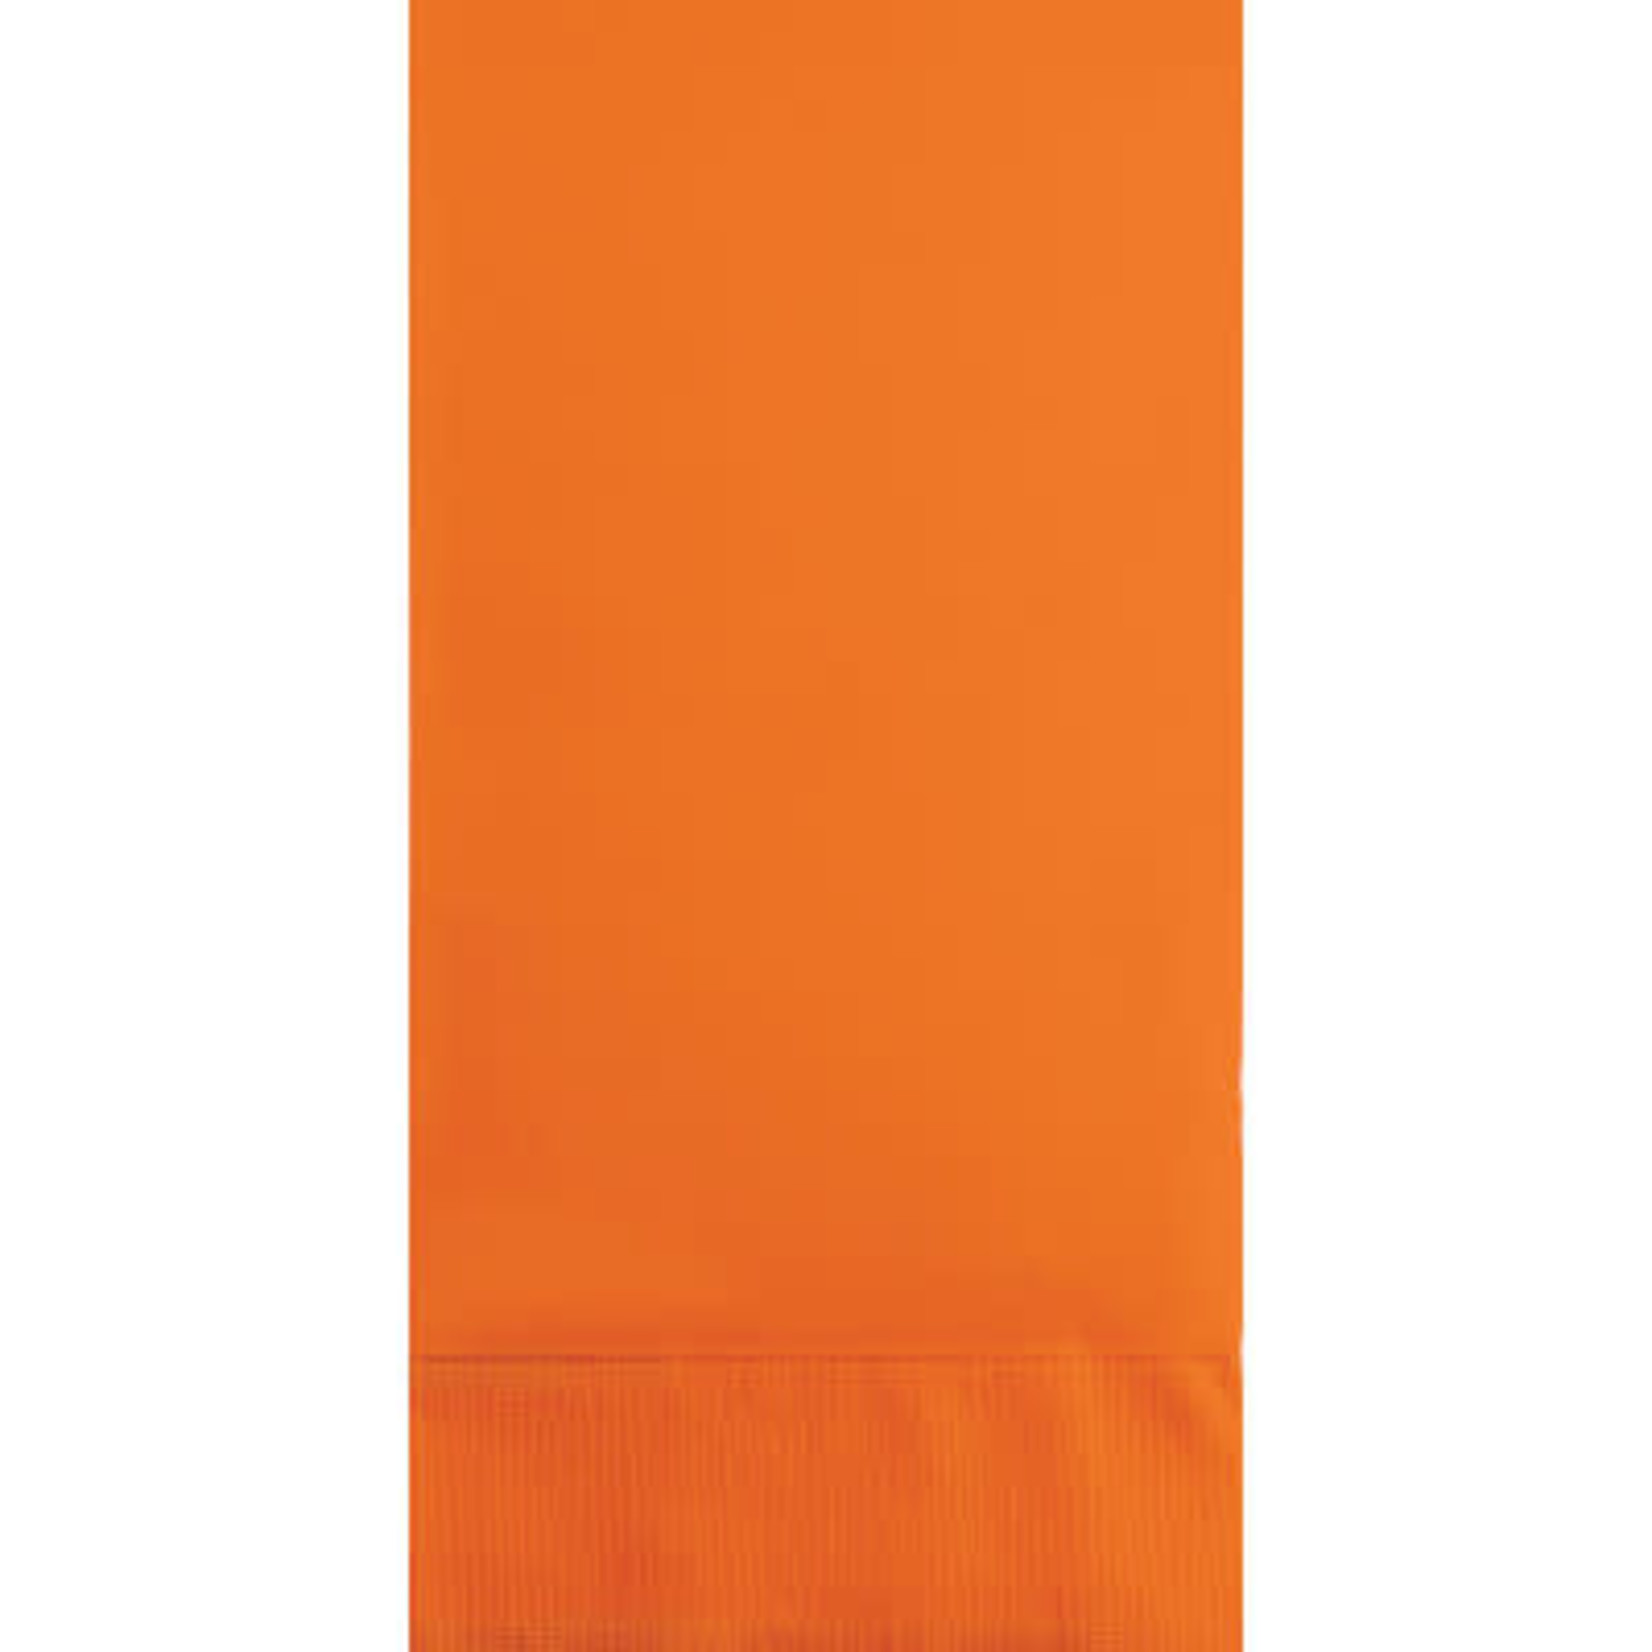 Touch of Color Sunkissed Orange 3-Ply Guest Towels - 16ct.